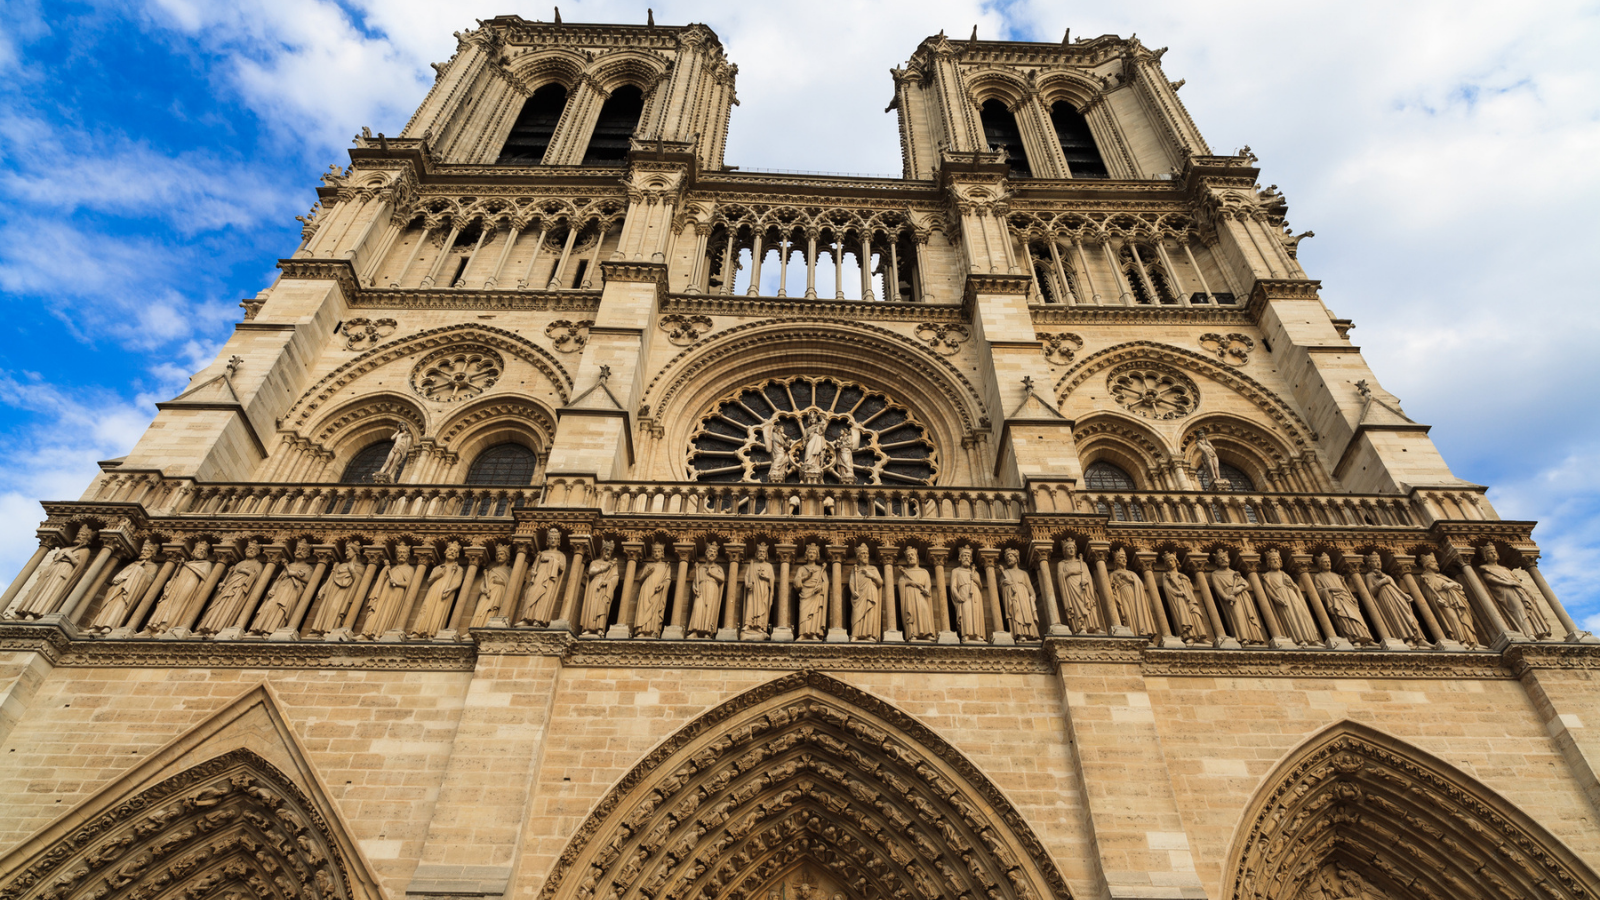 The Notre Dame building in France.